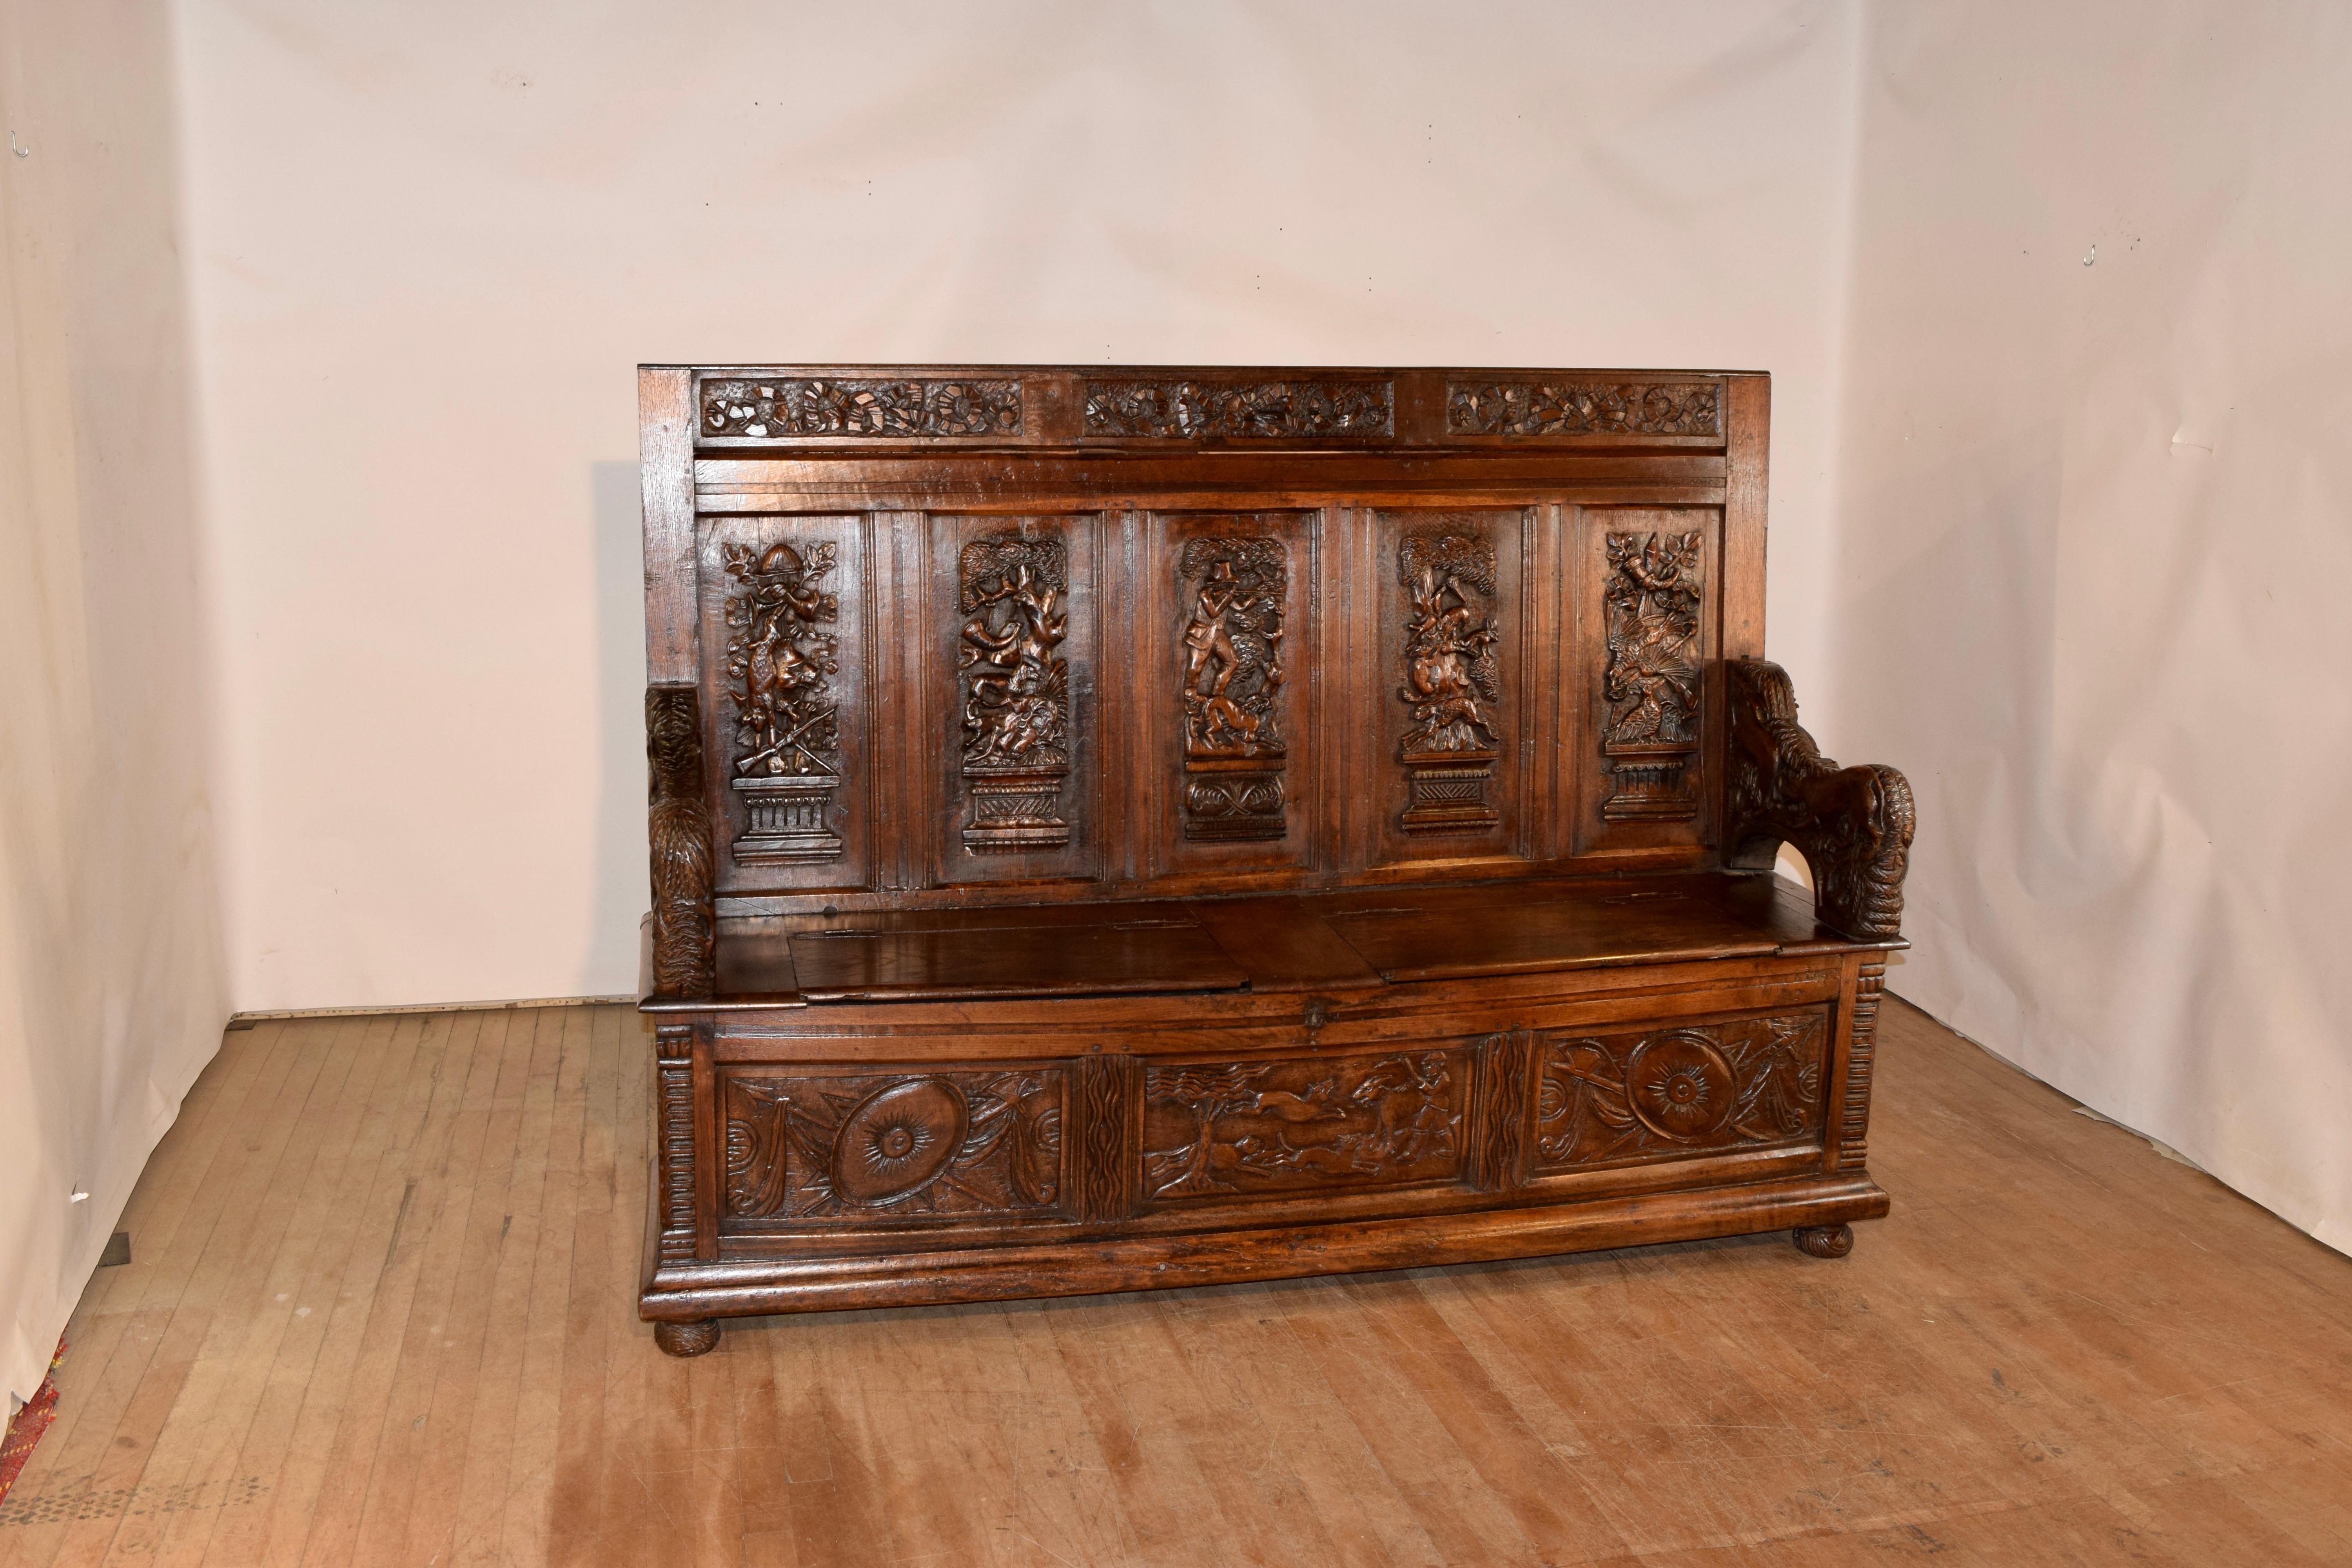 Spectacular 18th century hand carved bench from Germany. This bench is the best Black Forest bench we have had the pleasure to offer. The carving is exquisite. The back has three hand carved panels with ribbons over five hand carved main panels,